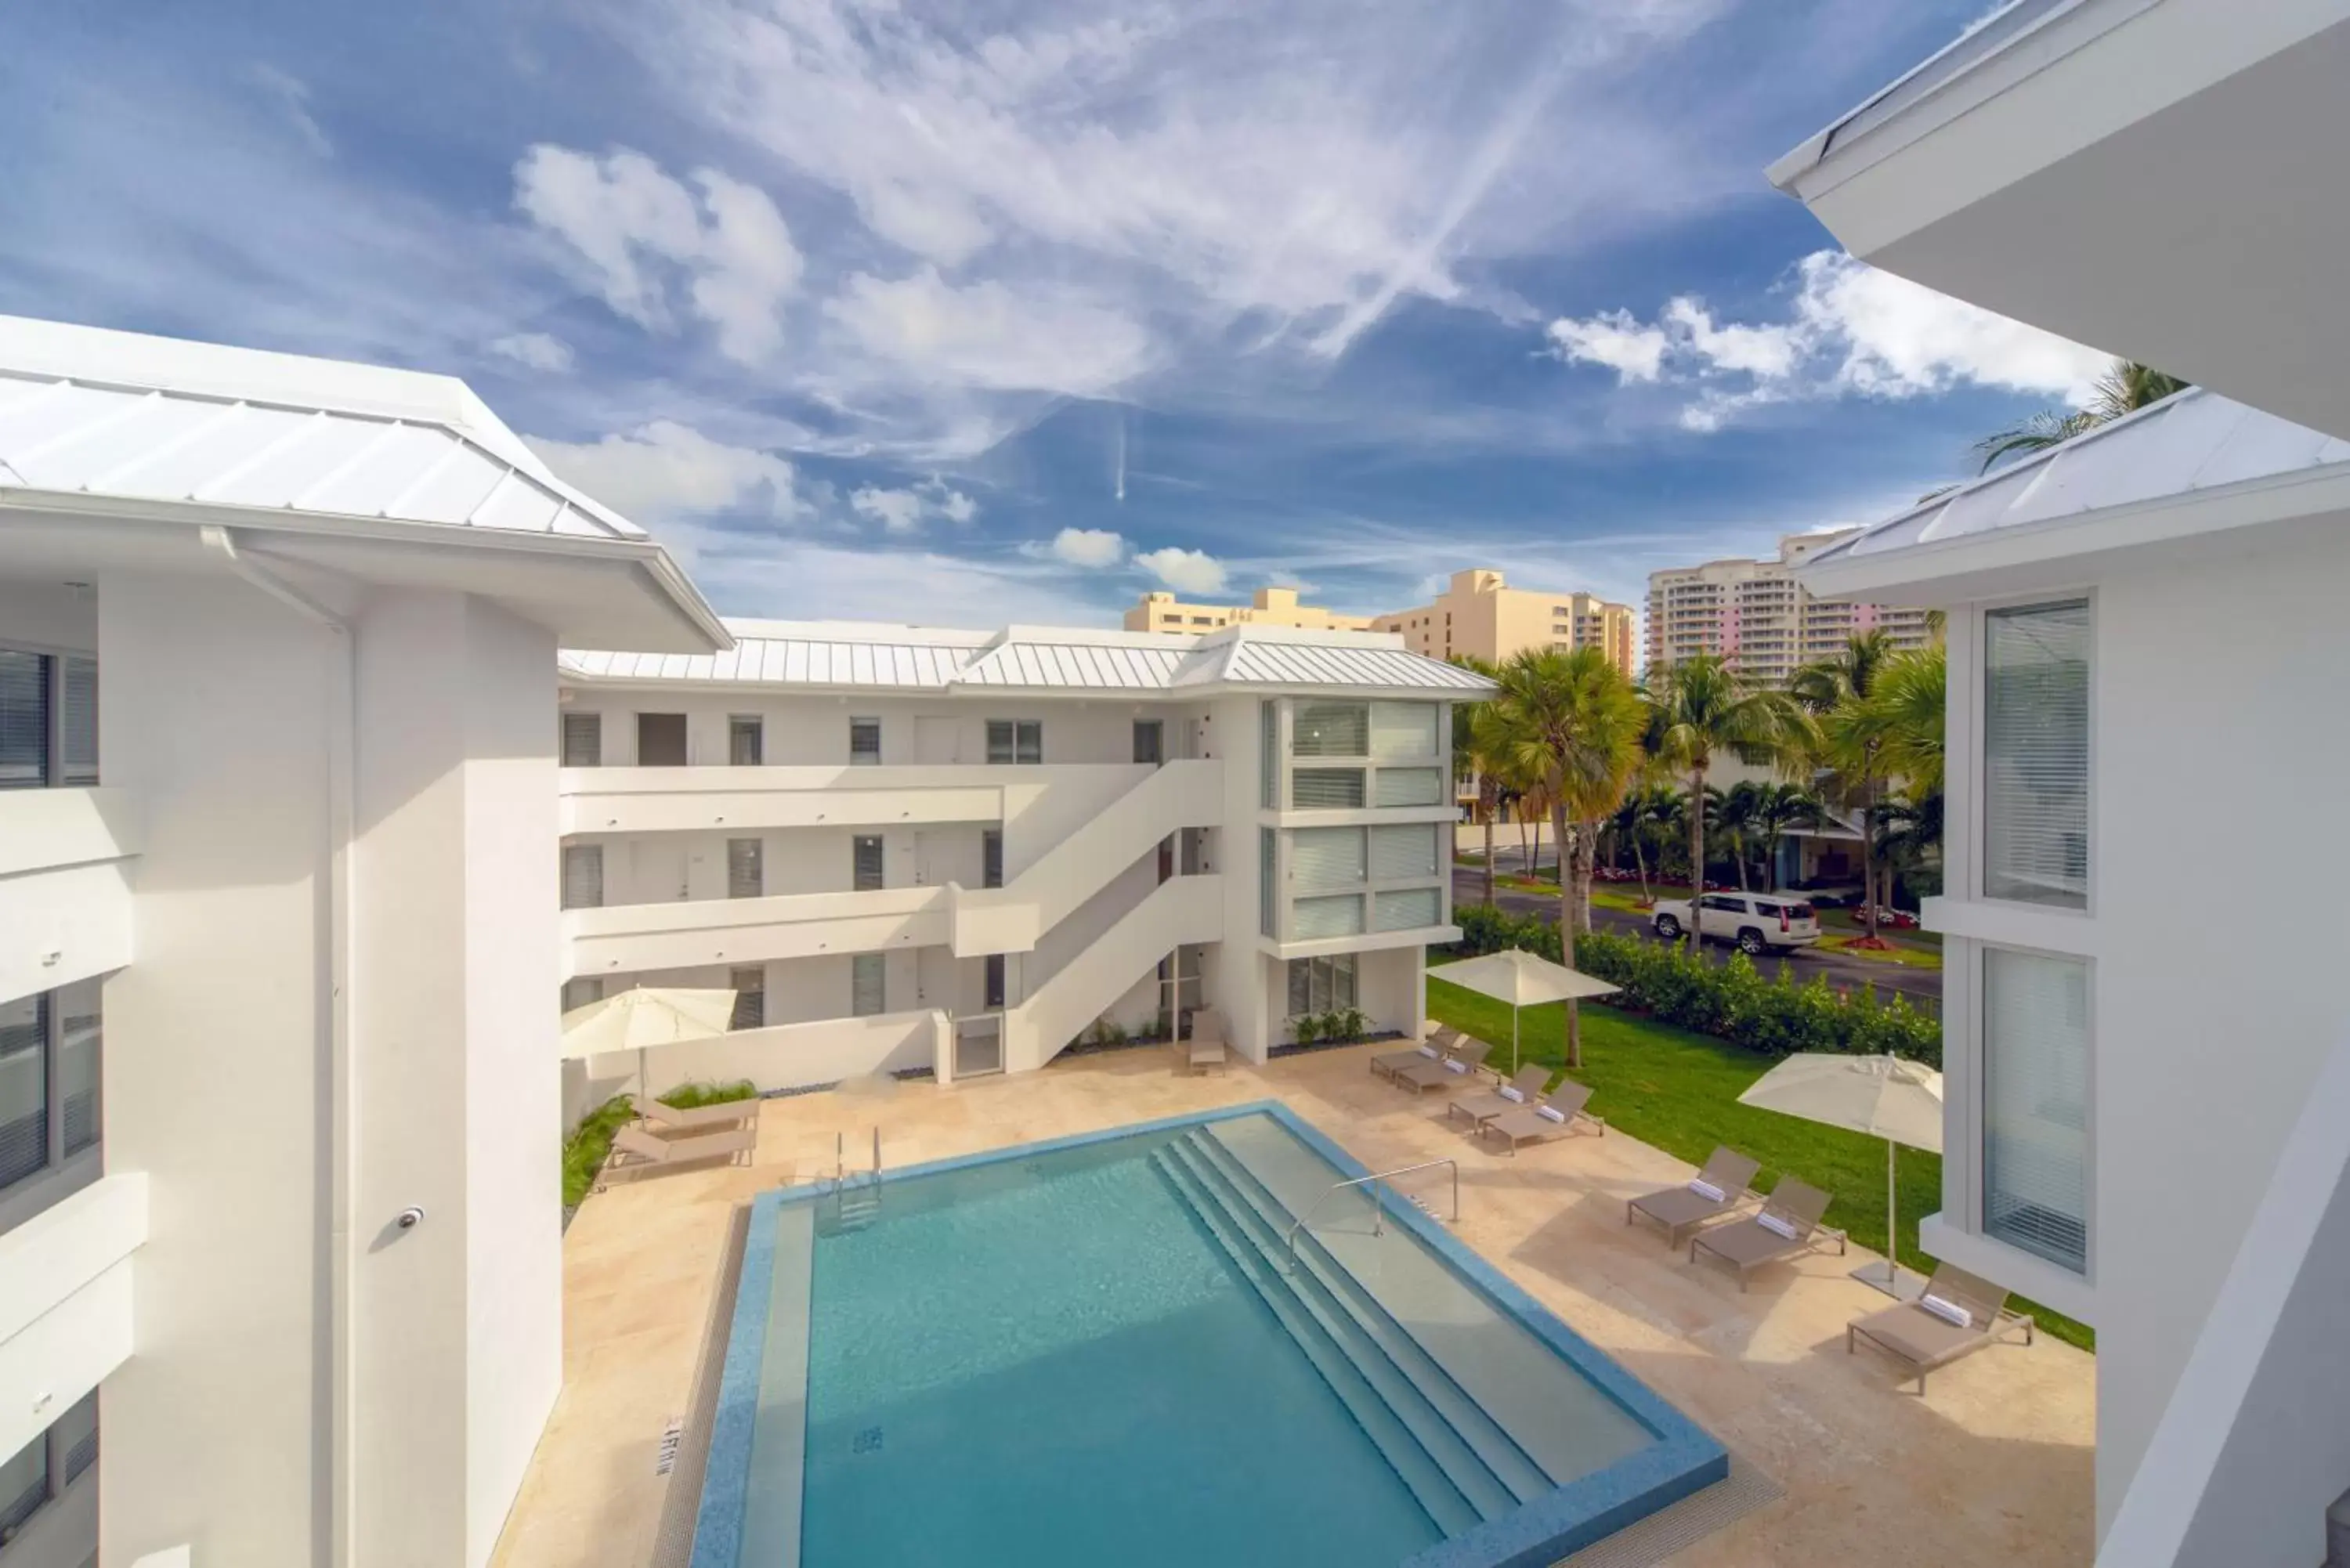 Bird's eye view, Pool View in Beach Haus Key Biscayne Contemporary Apartments